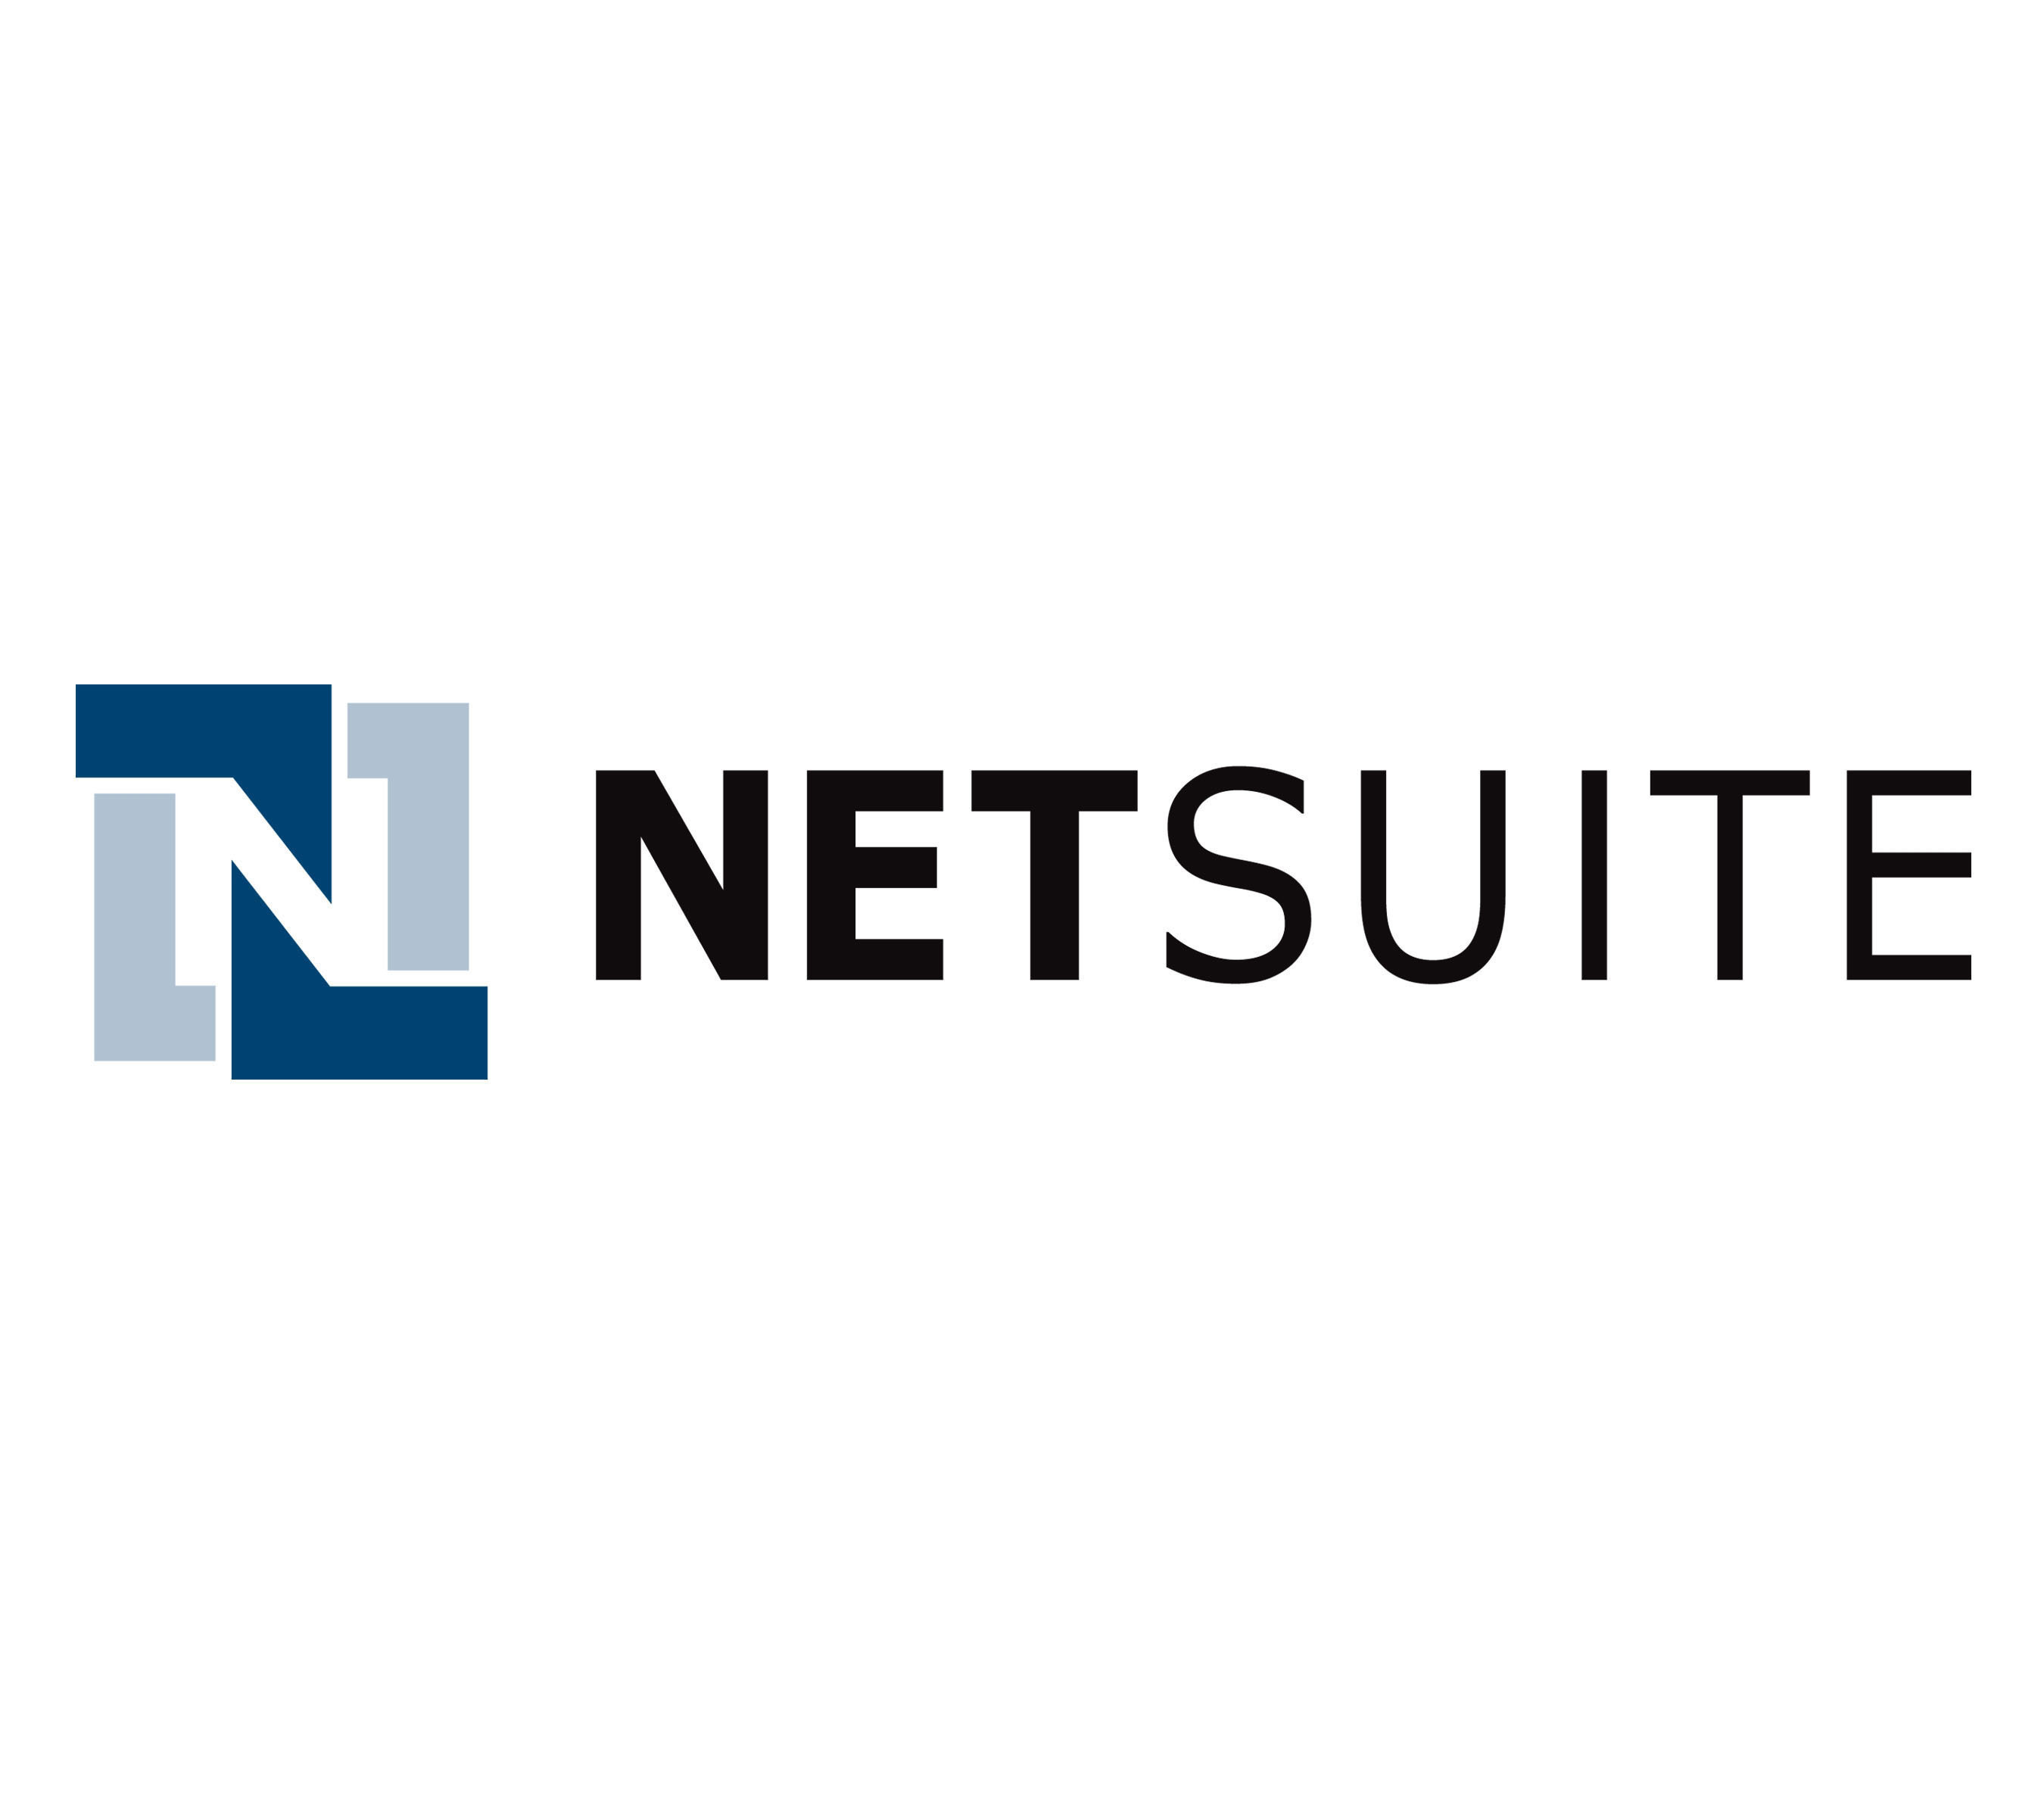 NetSuite. Where Business is Going.